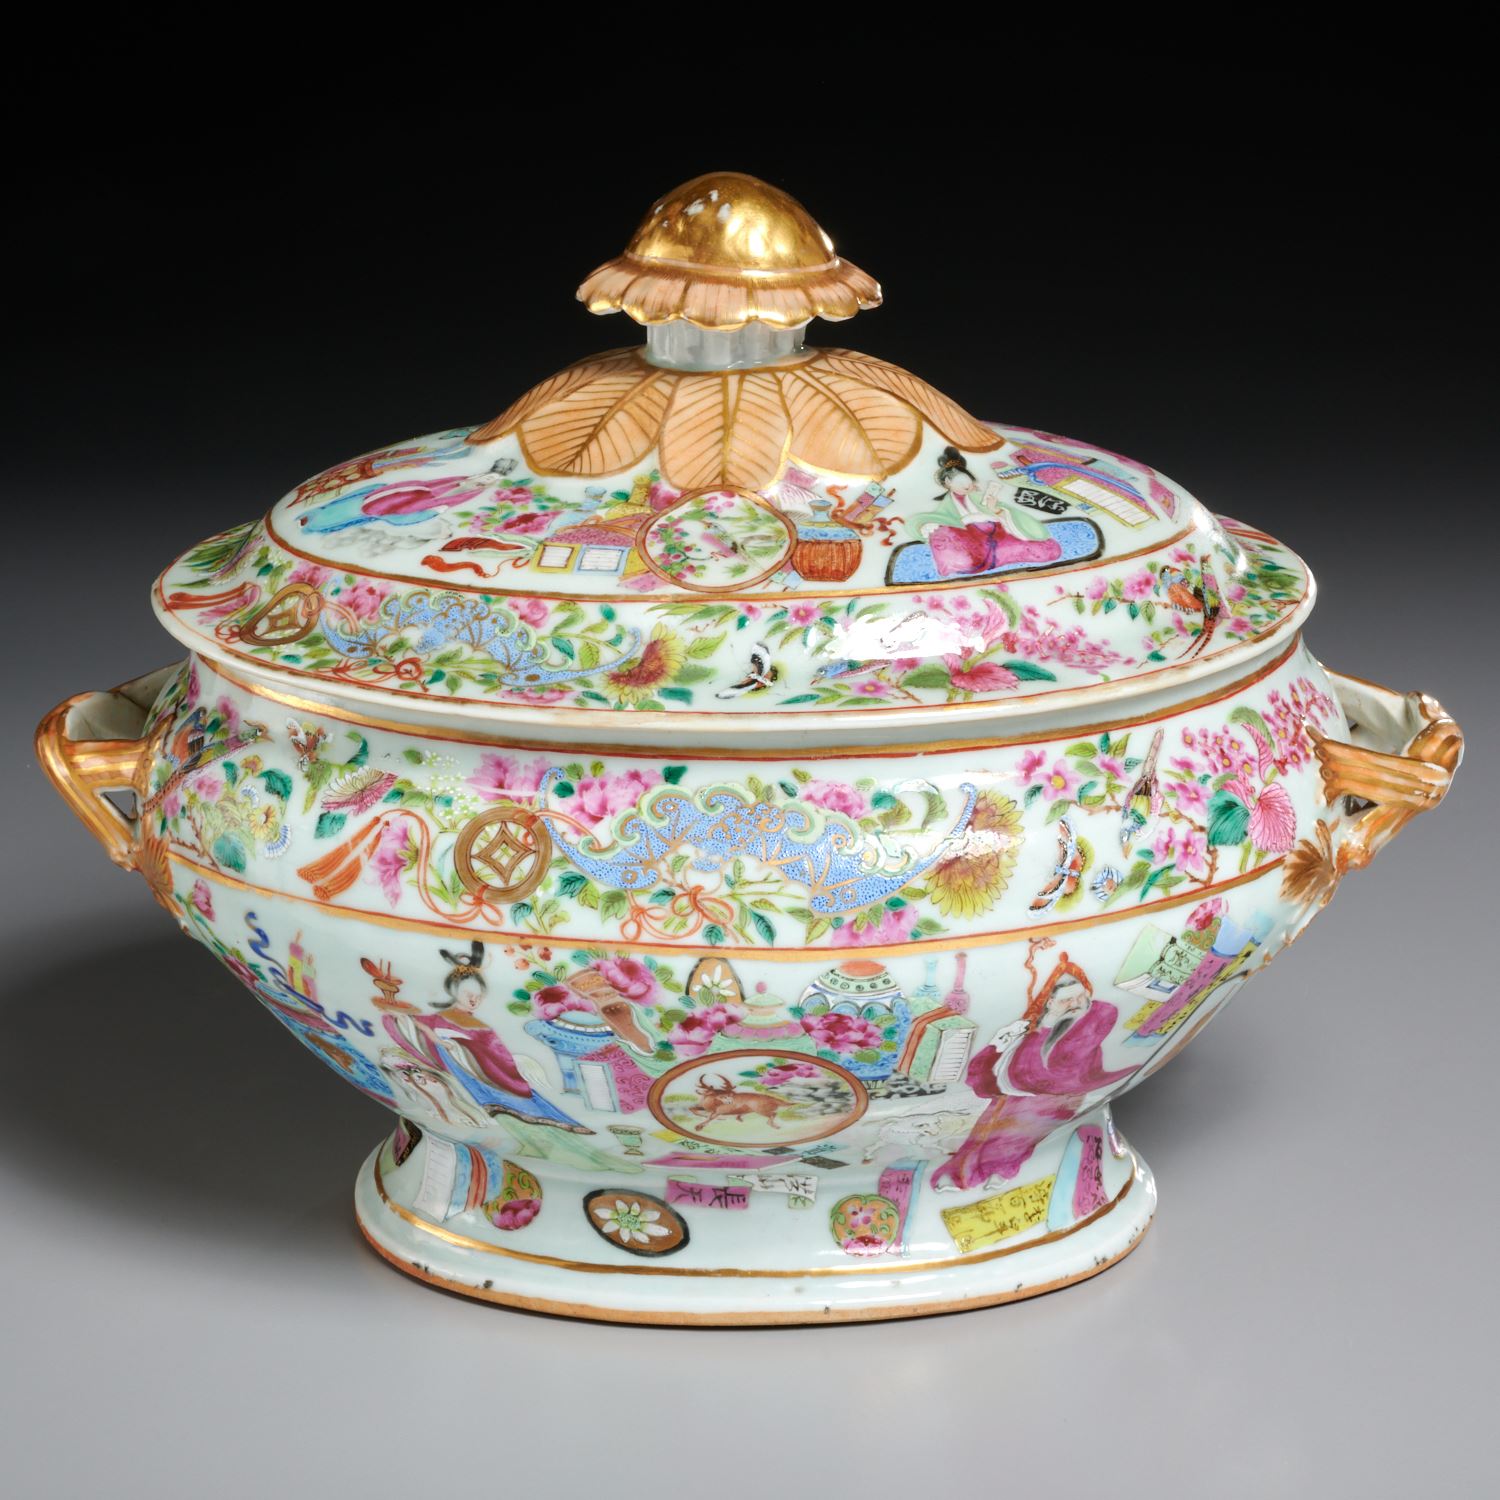 CHINESE EXPORT FAMILLE ROSE TUREEN 2a5d7b